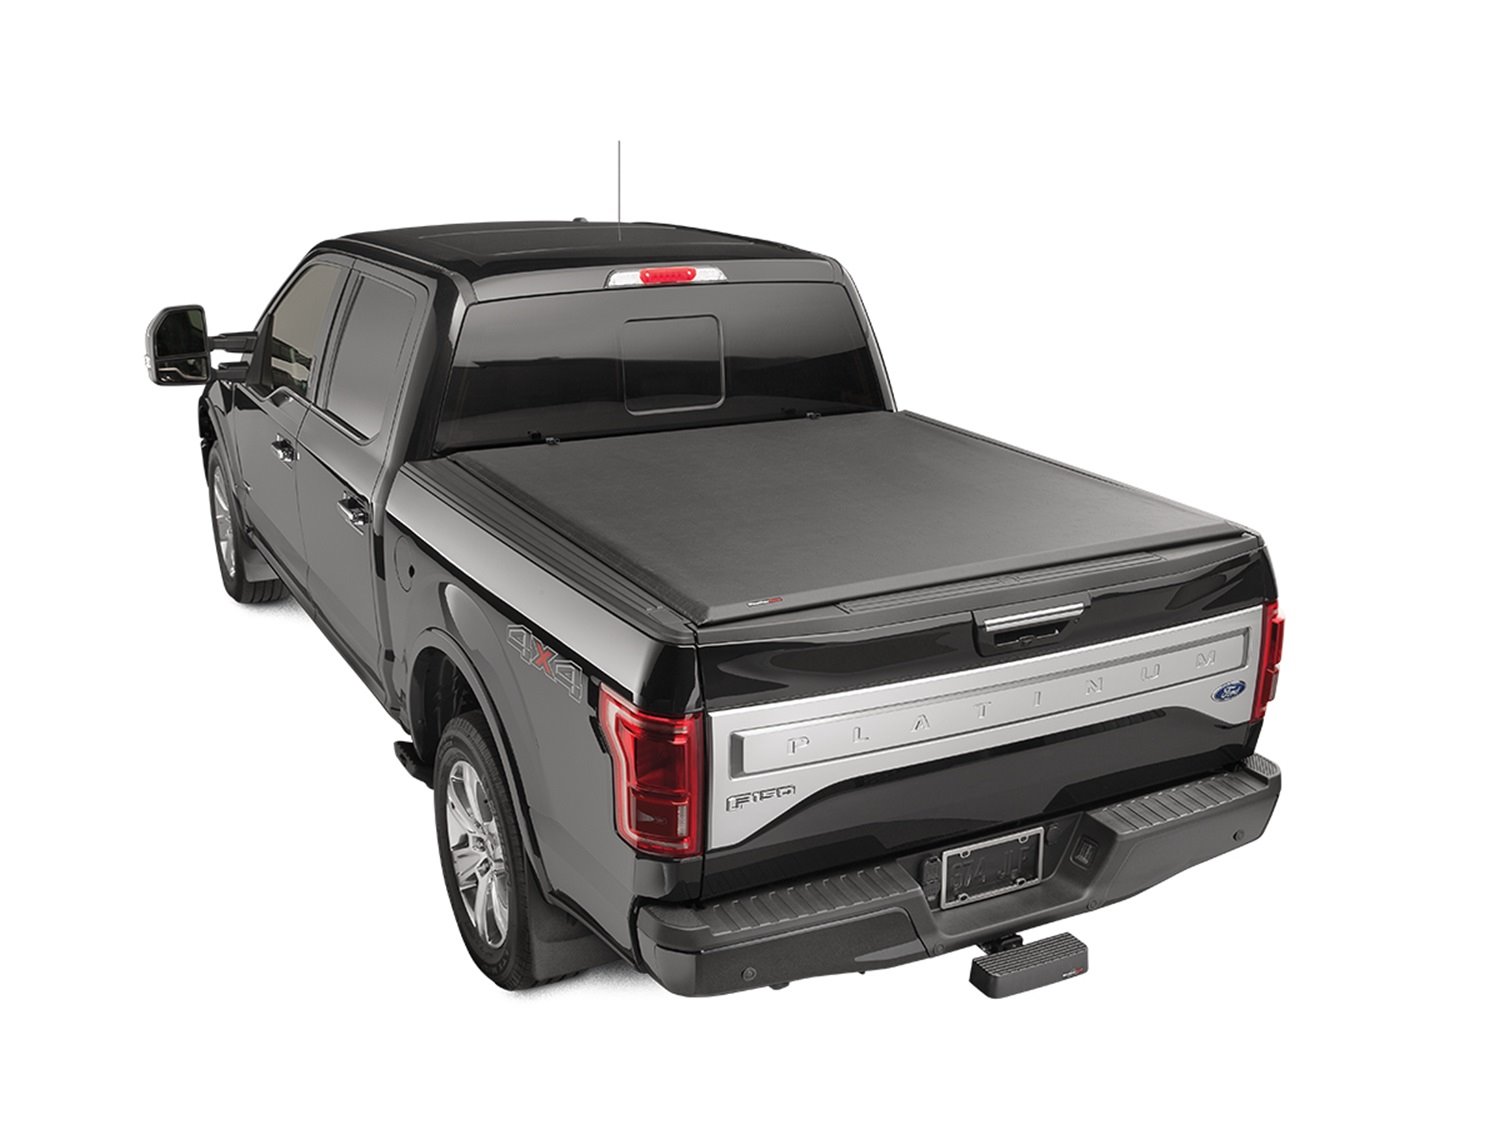 ROLL UP TRUCK BED COVER B TOYOTA TACOMA 2005-2015 TACOMA DOUBLE CAB 5 BED